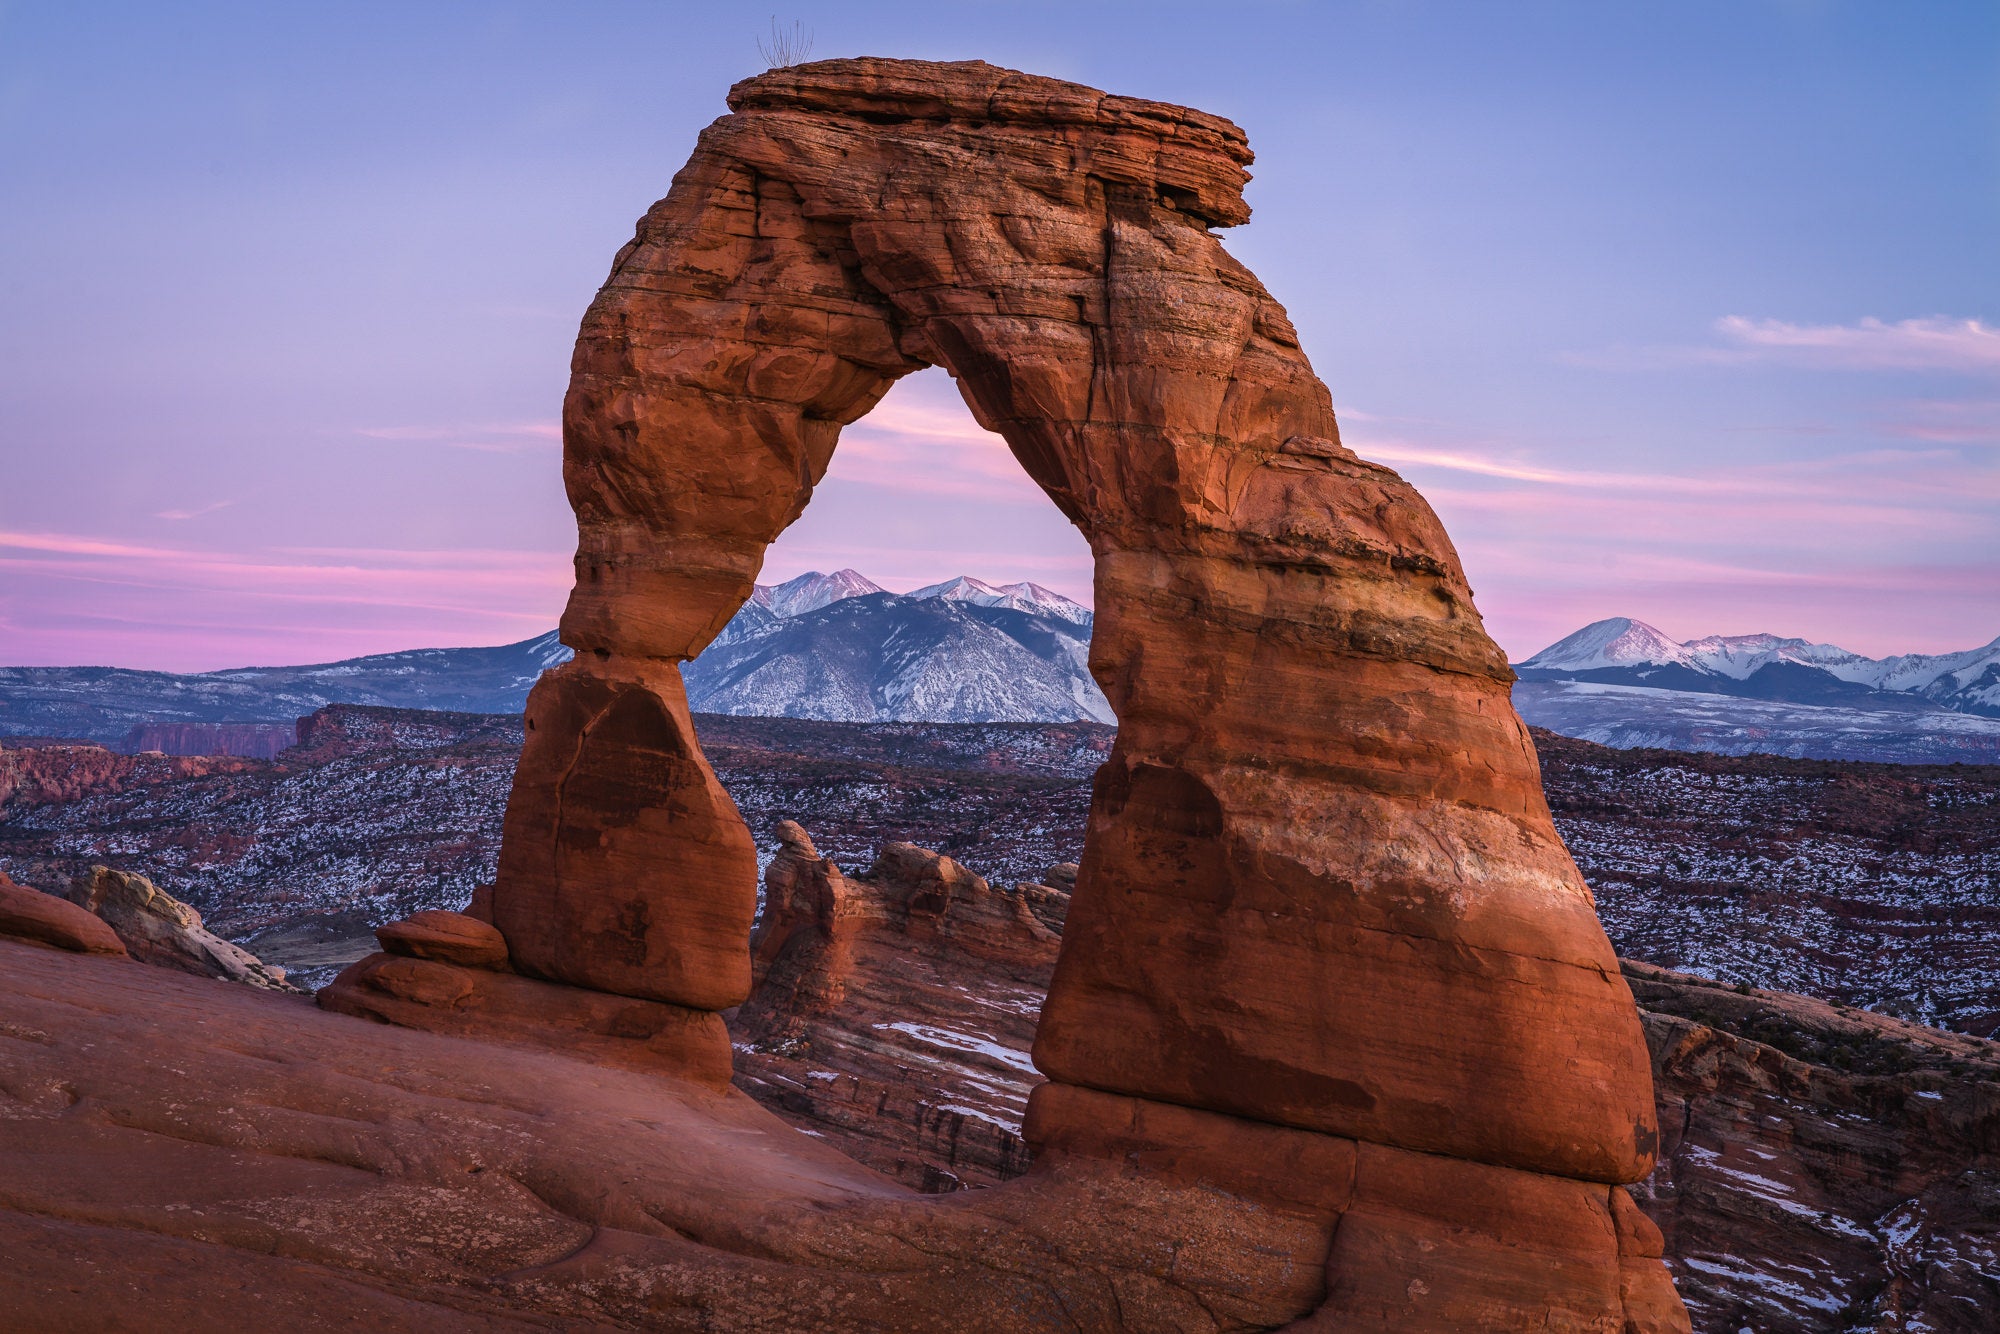 A post-sunset glow on the famous Delicate Arch in Utah’s Arches National Park. Photo by Dylan McMains. Sony Alpha 7R II. Sony 85mm f/1.8. 1/13-sec., f/11, ISO 100